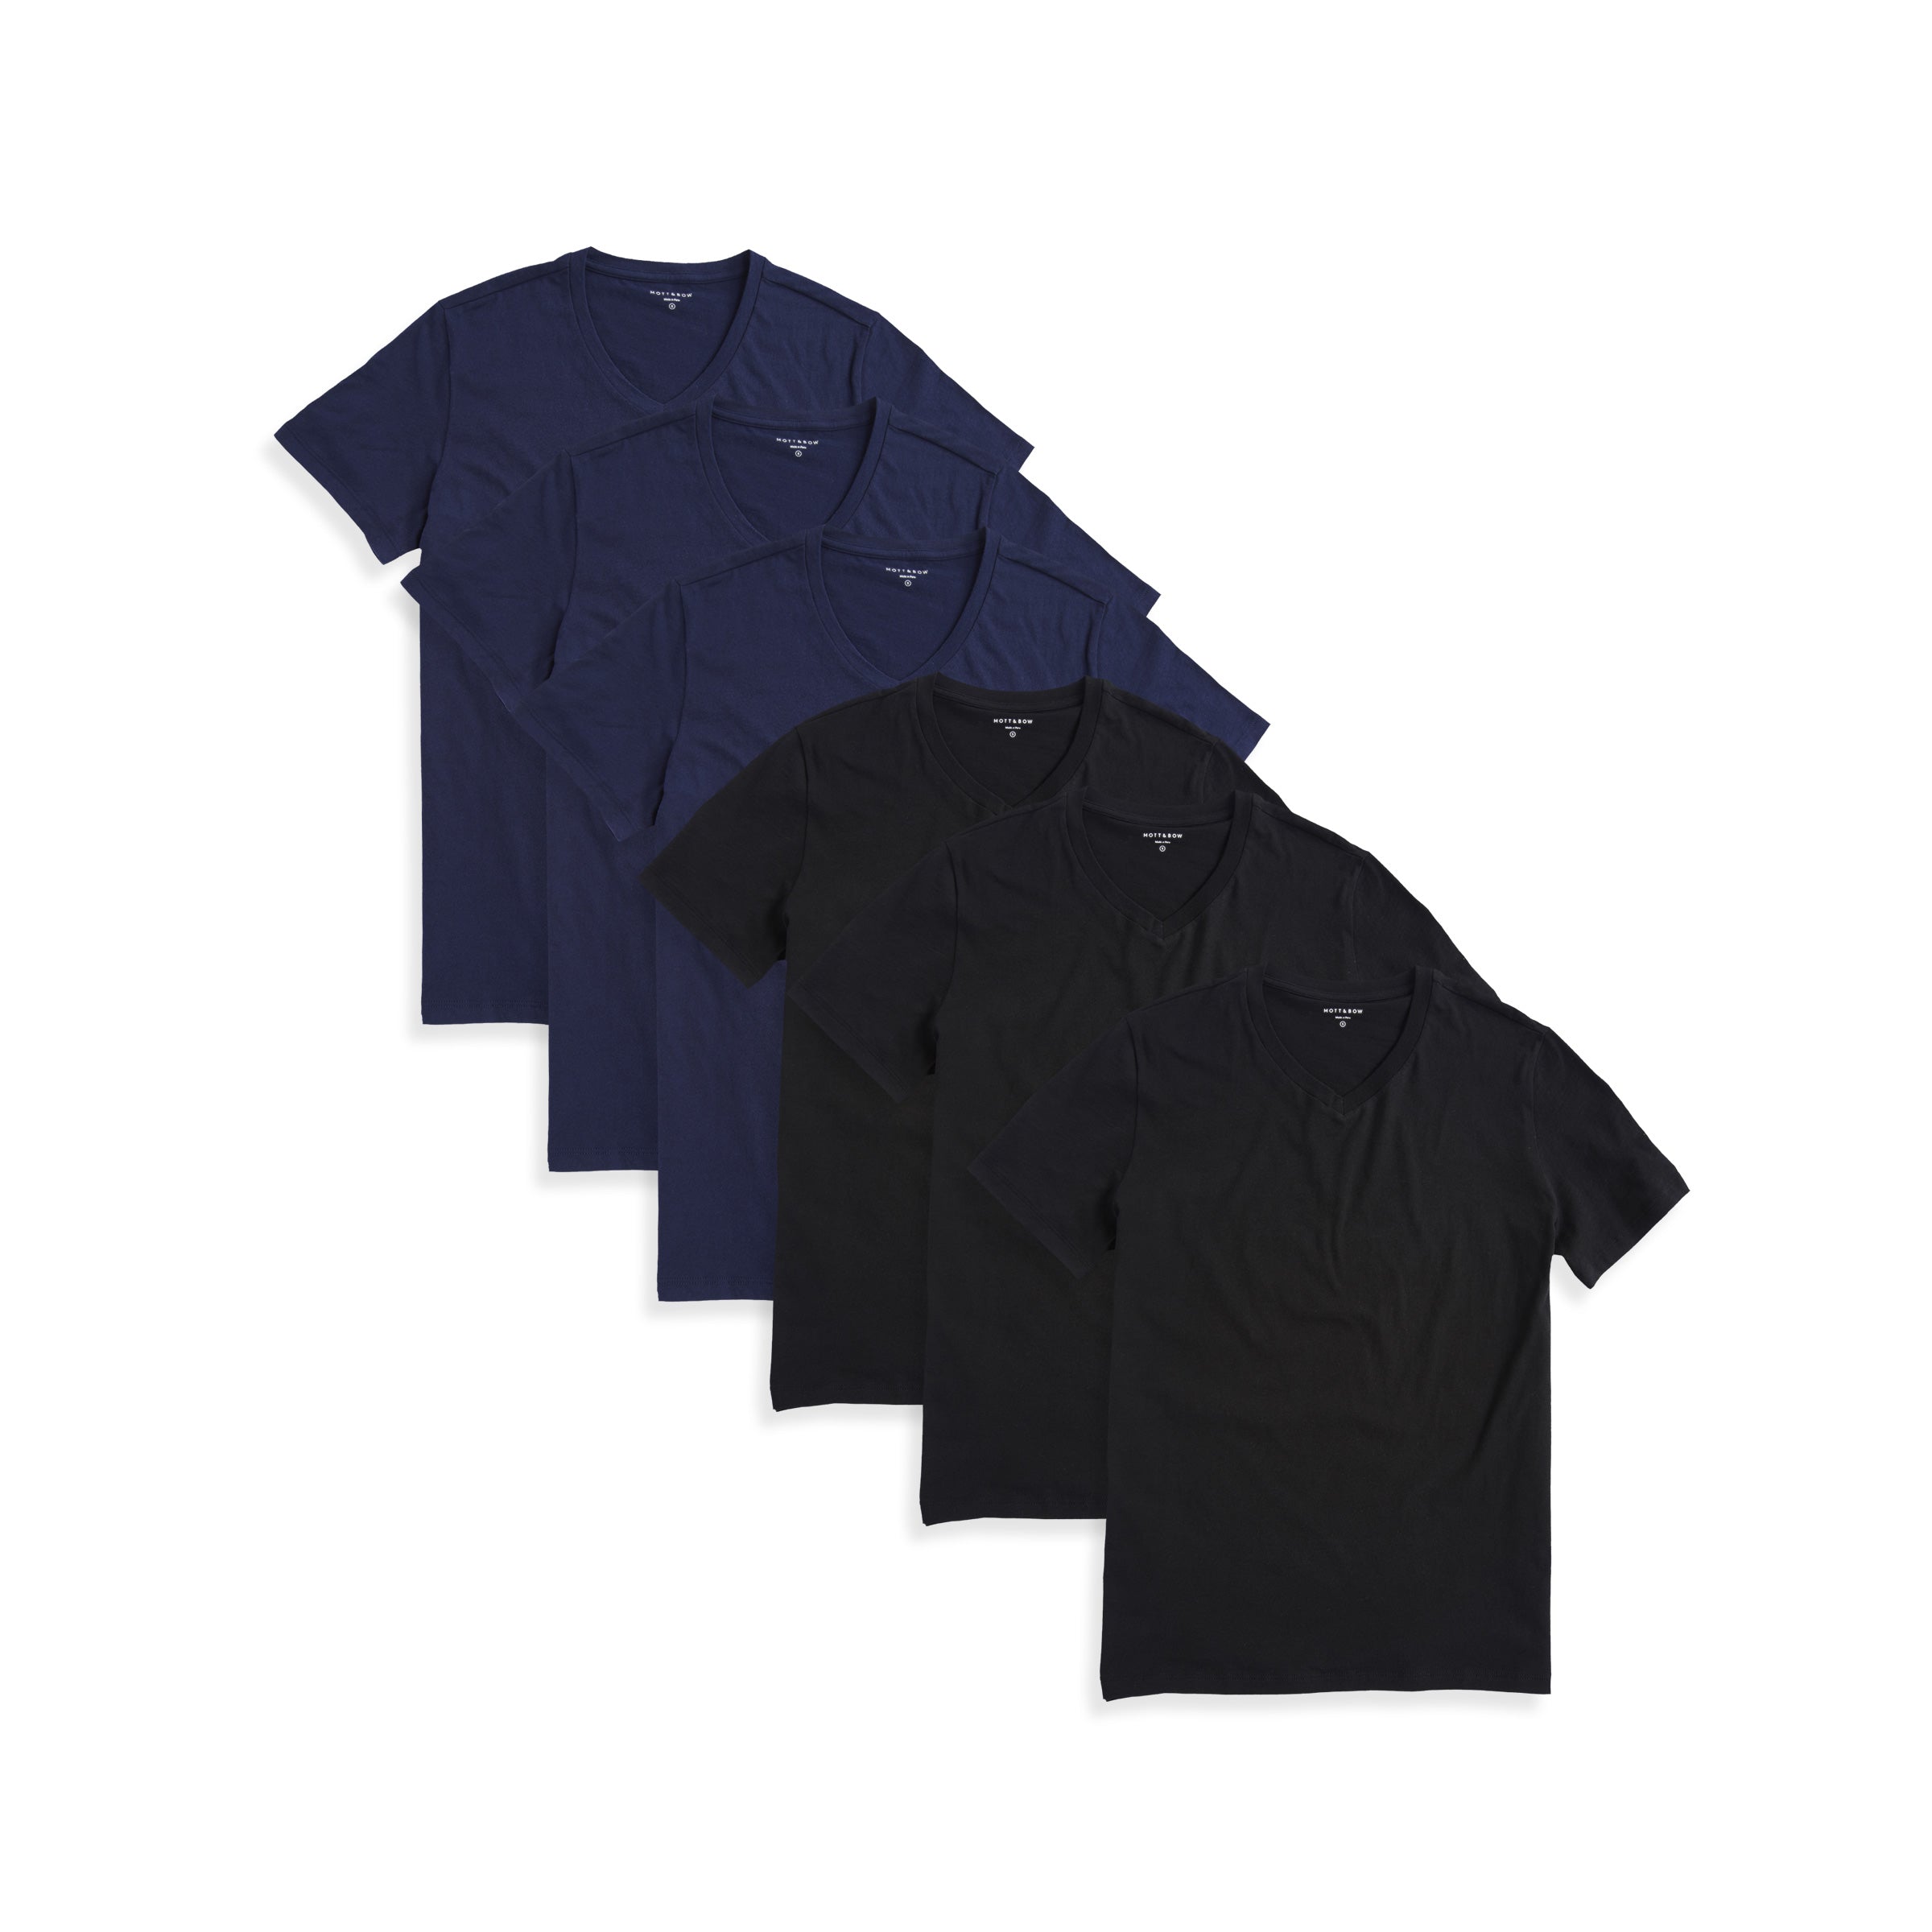  wearing Black/Navy Classic V-Neck Driggs 6-Pack